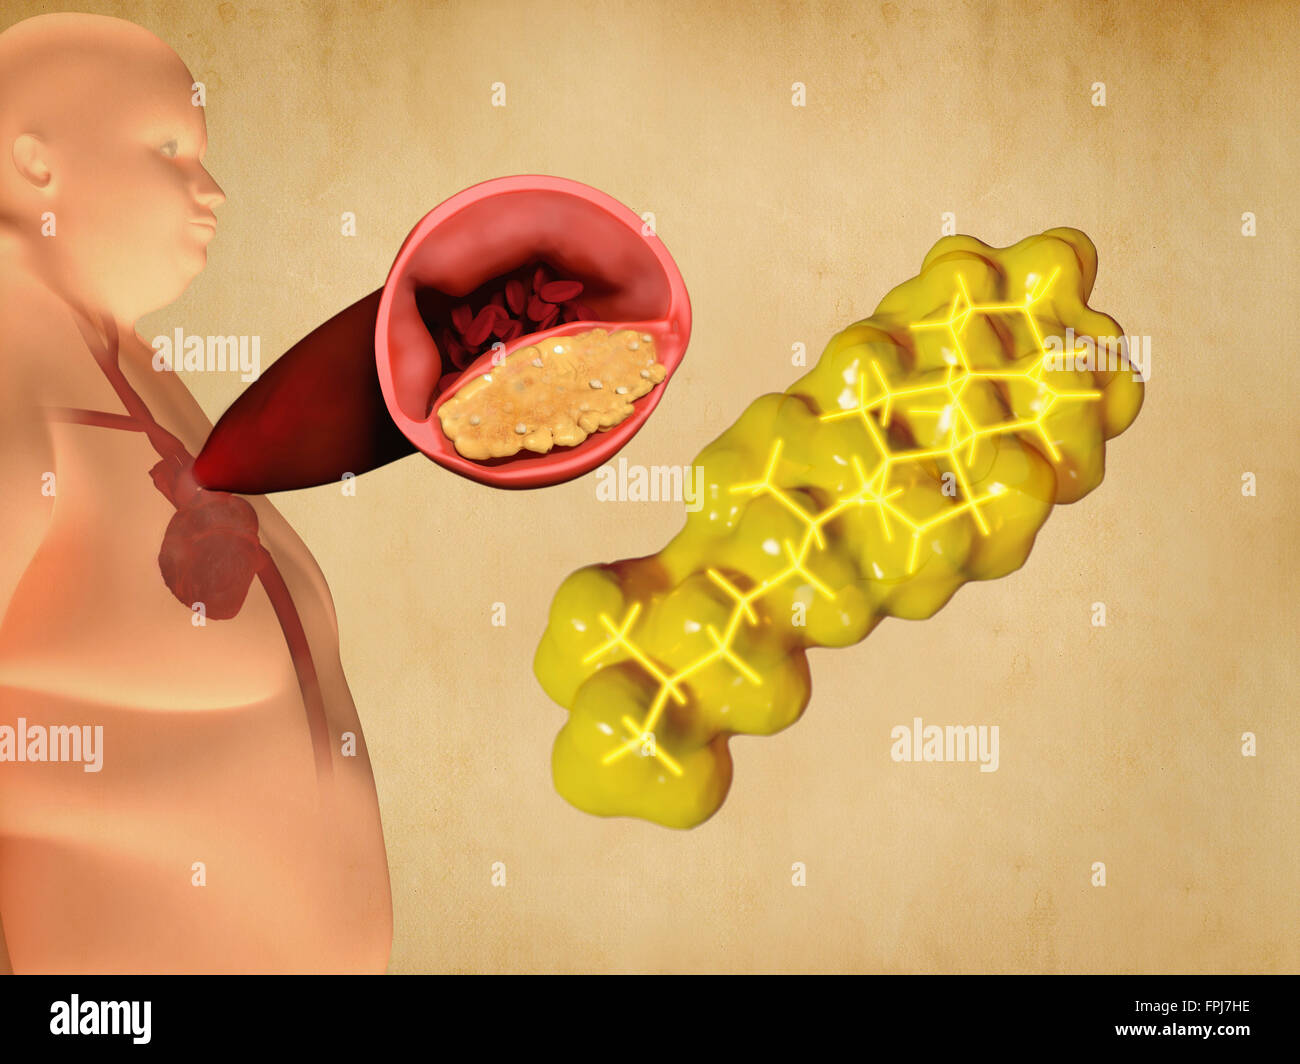 Cholesterol   atherosclerosis. Illustrati  of a molecular model of cholesterol (yellow) with a human figure   a cutaway view of Stock Photo